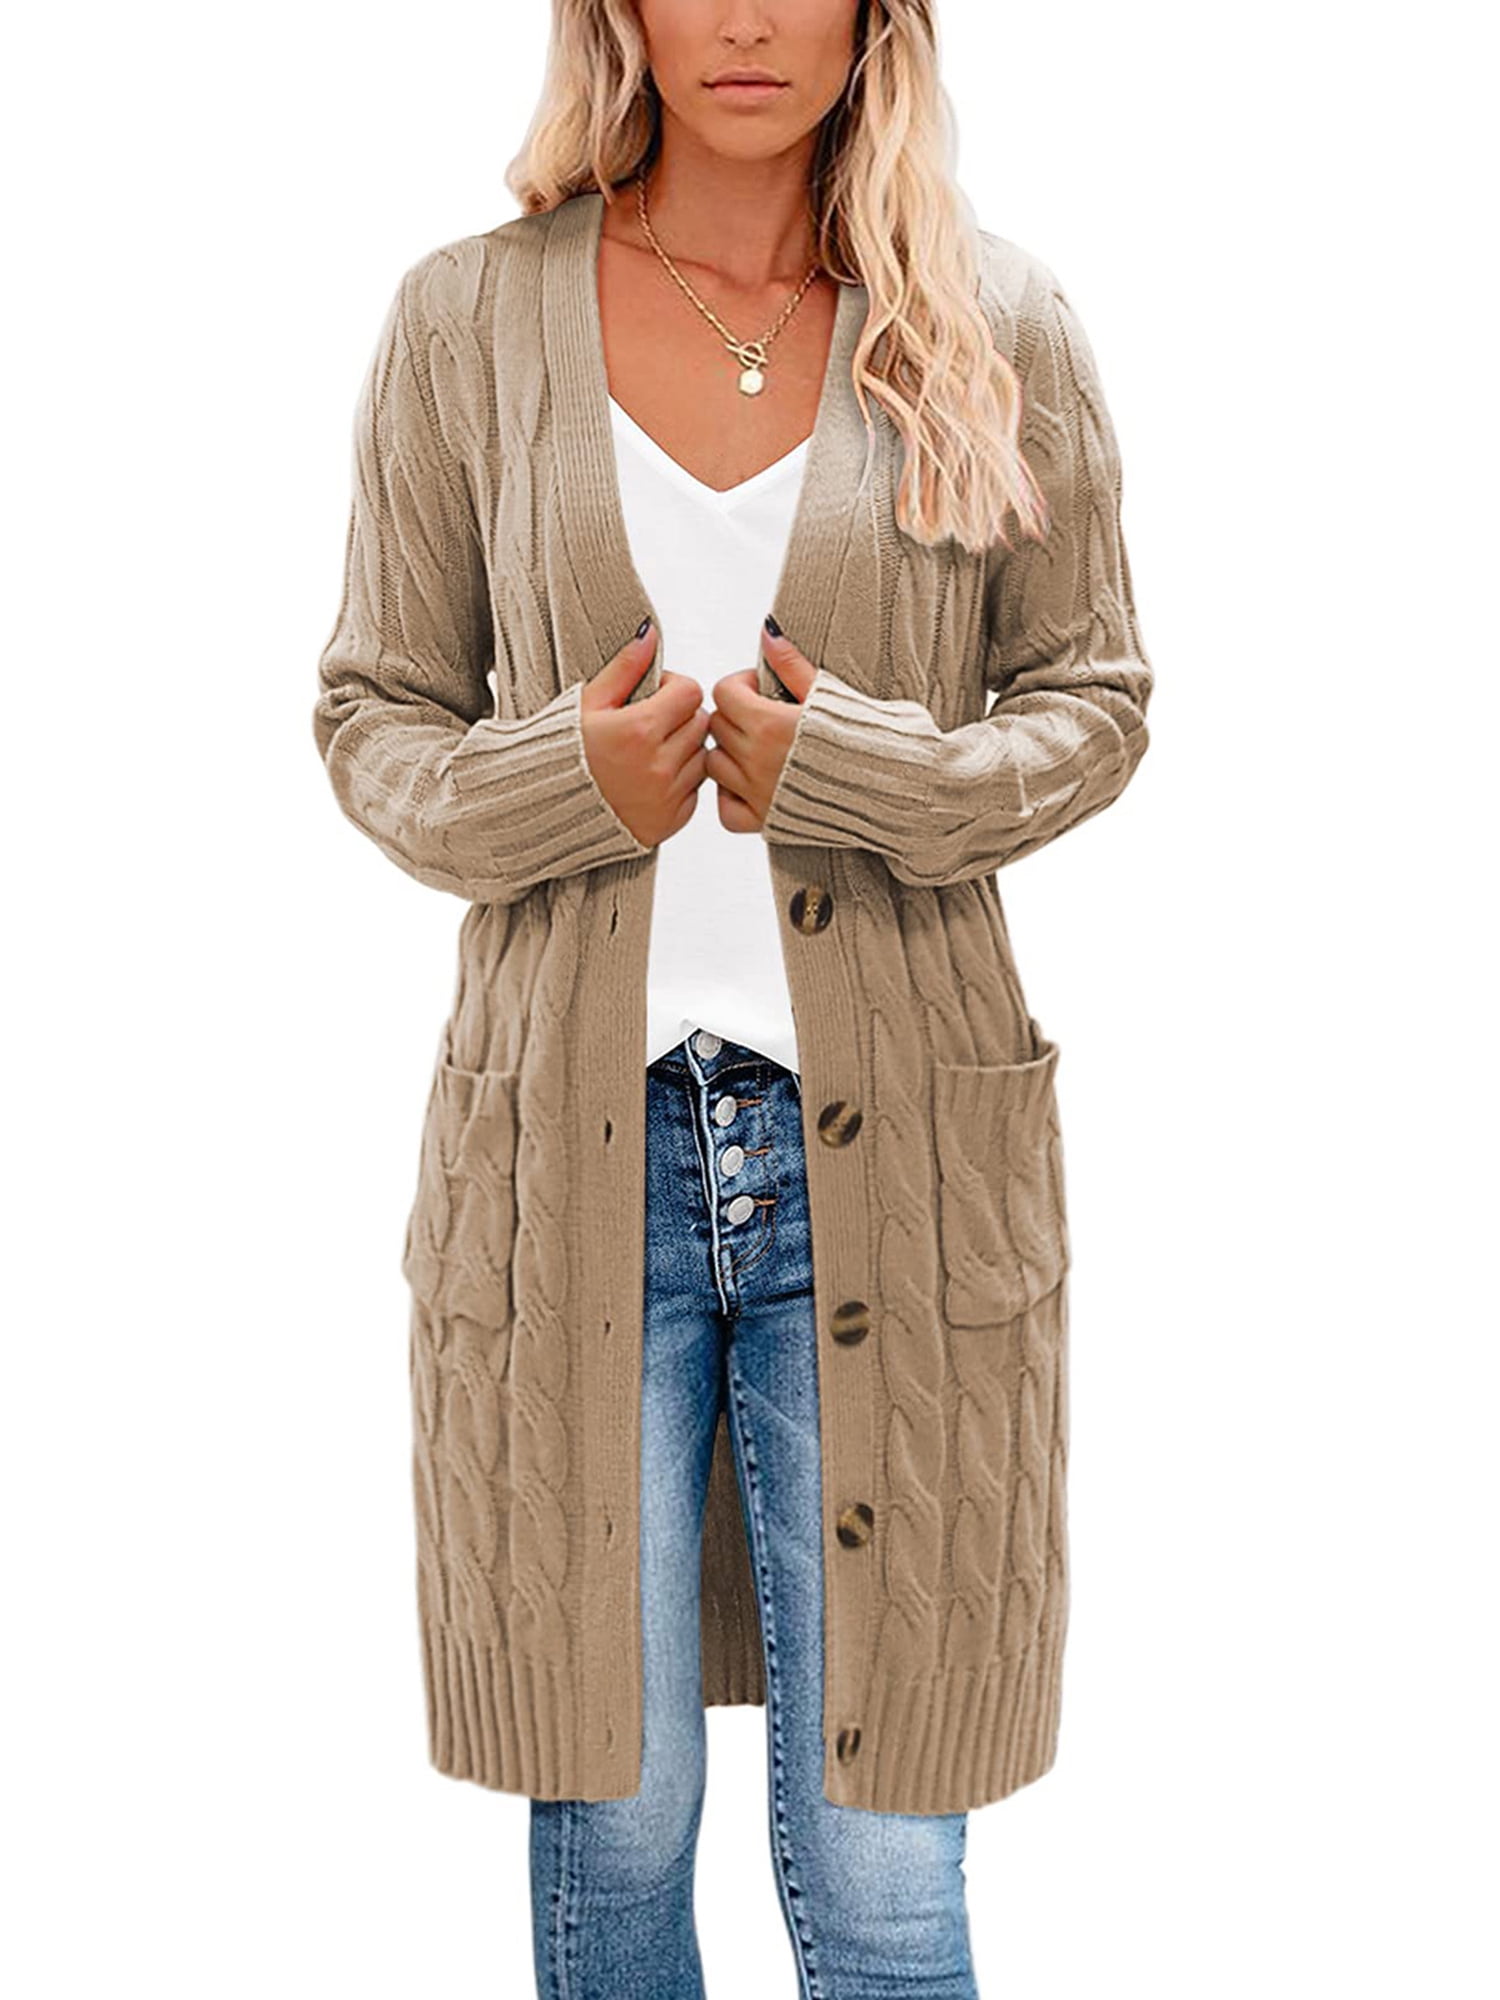 GRACE KARIN Women Open Front Knitted Cardigan Sweater Long Sleeve Long Knitting Trench Jumper with Pockets